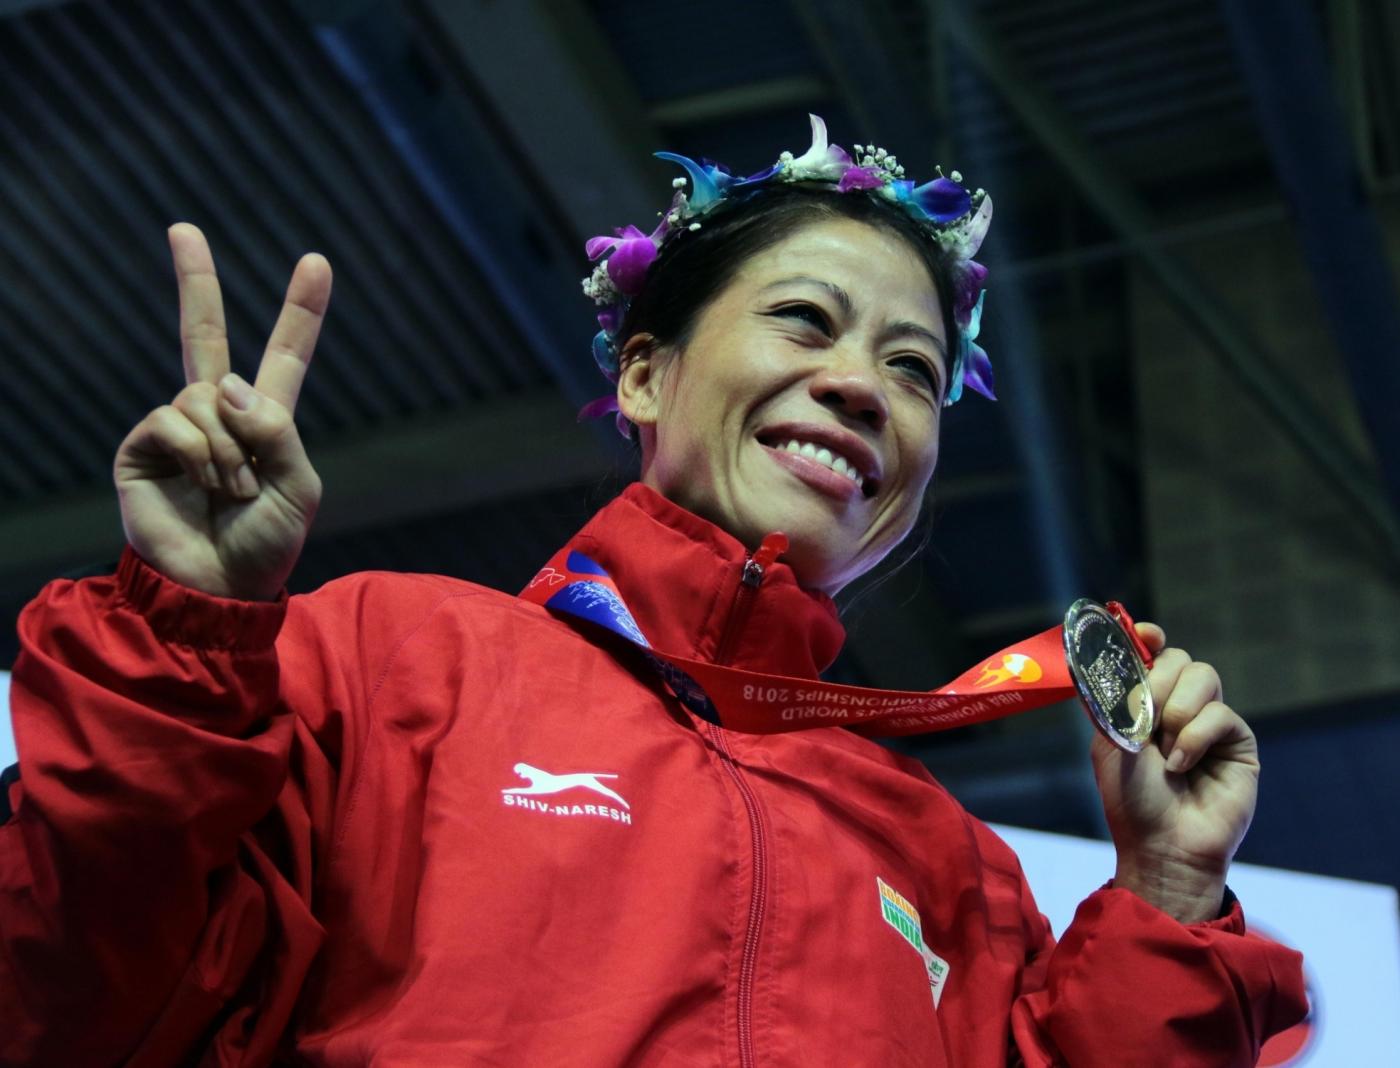 New Delhi: Indian boxing legend M.C. Mary Kom poses with her gold medal after she defeated Ukraine's Hanna Okhota during a final match in the light flyweight 48 kilogram category during the 10th AIBA Women's World Boxing Championships in New Delhi, on Nov 24, 2018. Mary Kom scripted history by clinching a record sixth World Championship Gold medal in the light flyweight 48 kilogram category after outclassing Ukraine's Hanna Okhota 5:0. (Photo: IANS) by .